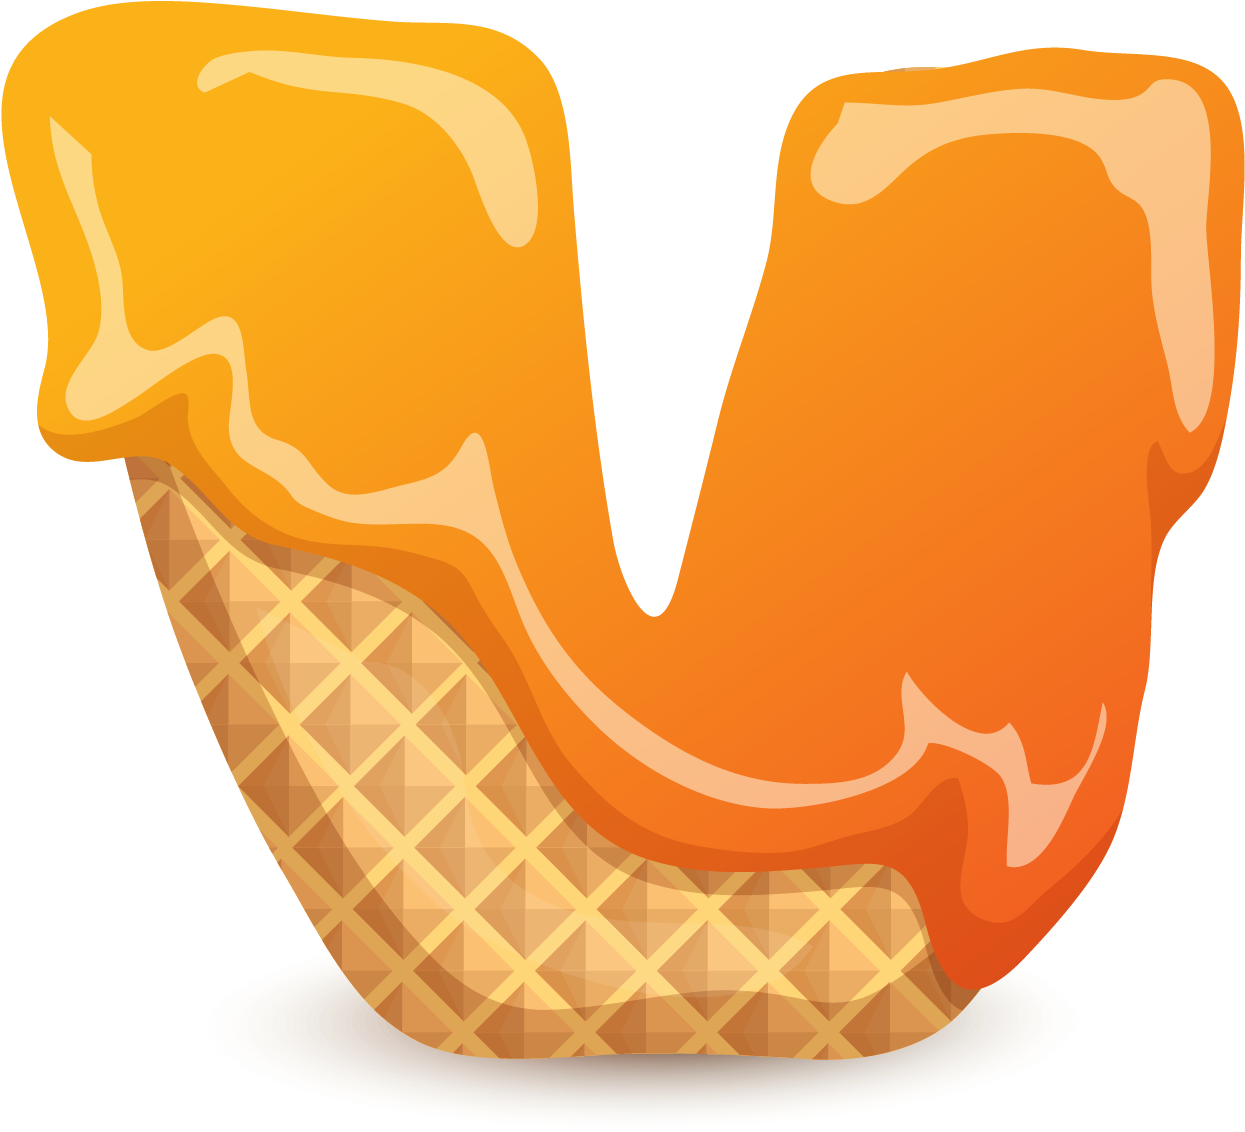 Melted Letter V Ice Cream Cone